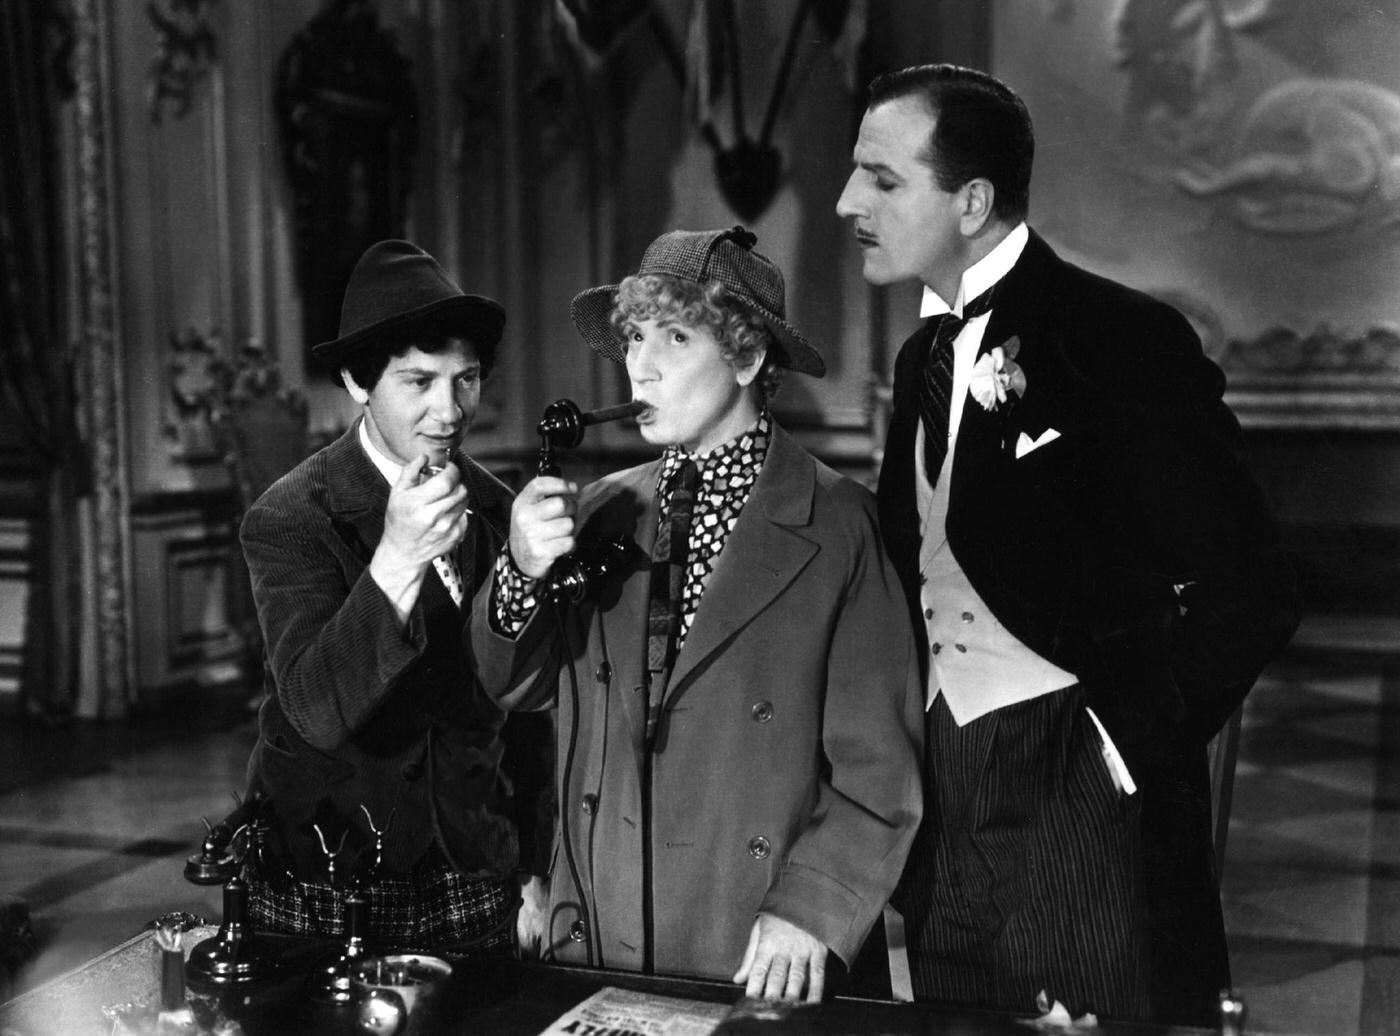 The Marx Brothers in the film Duck Soup (1933)